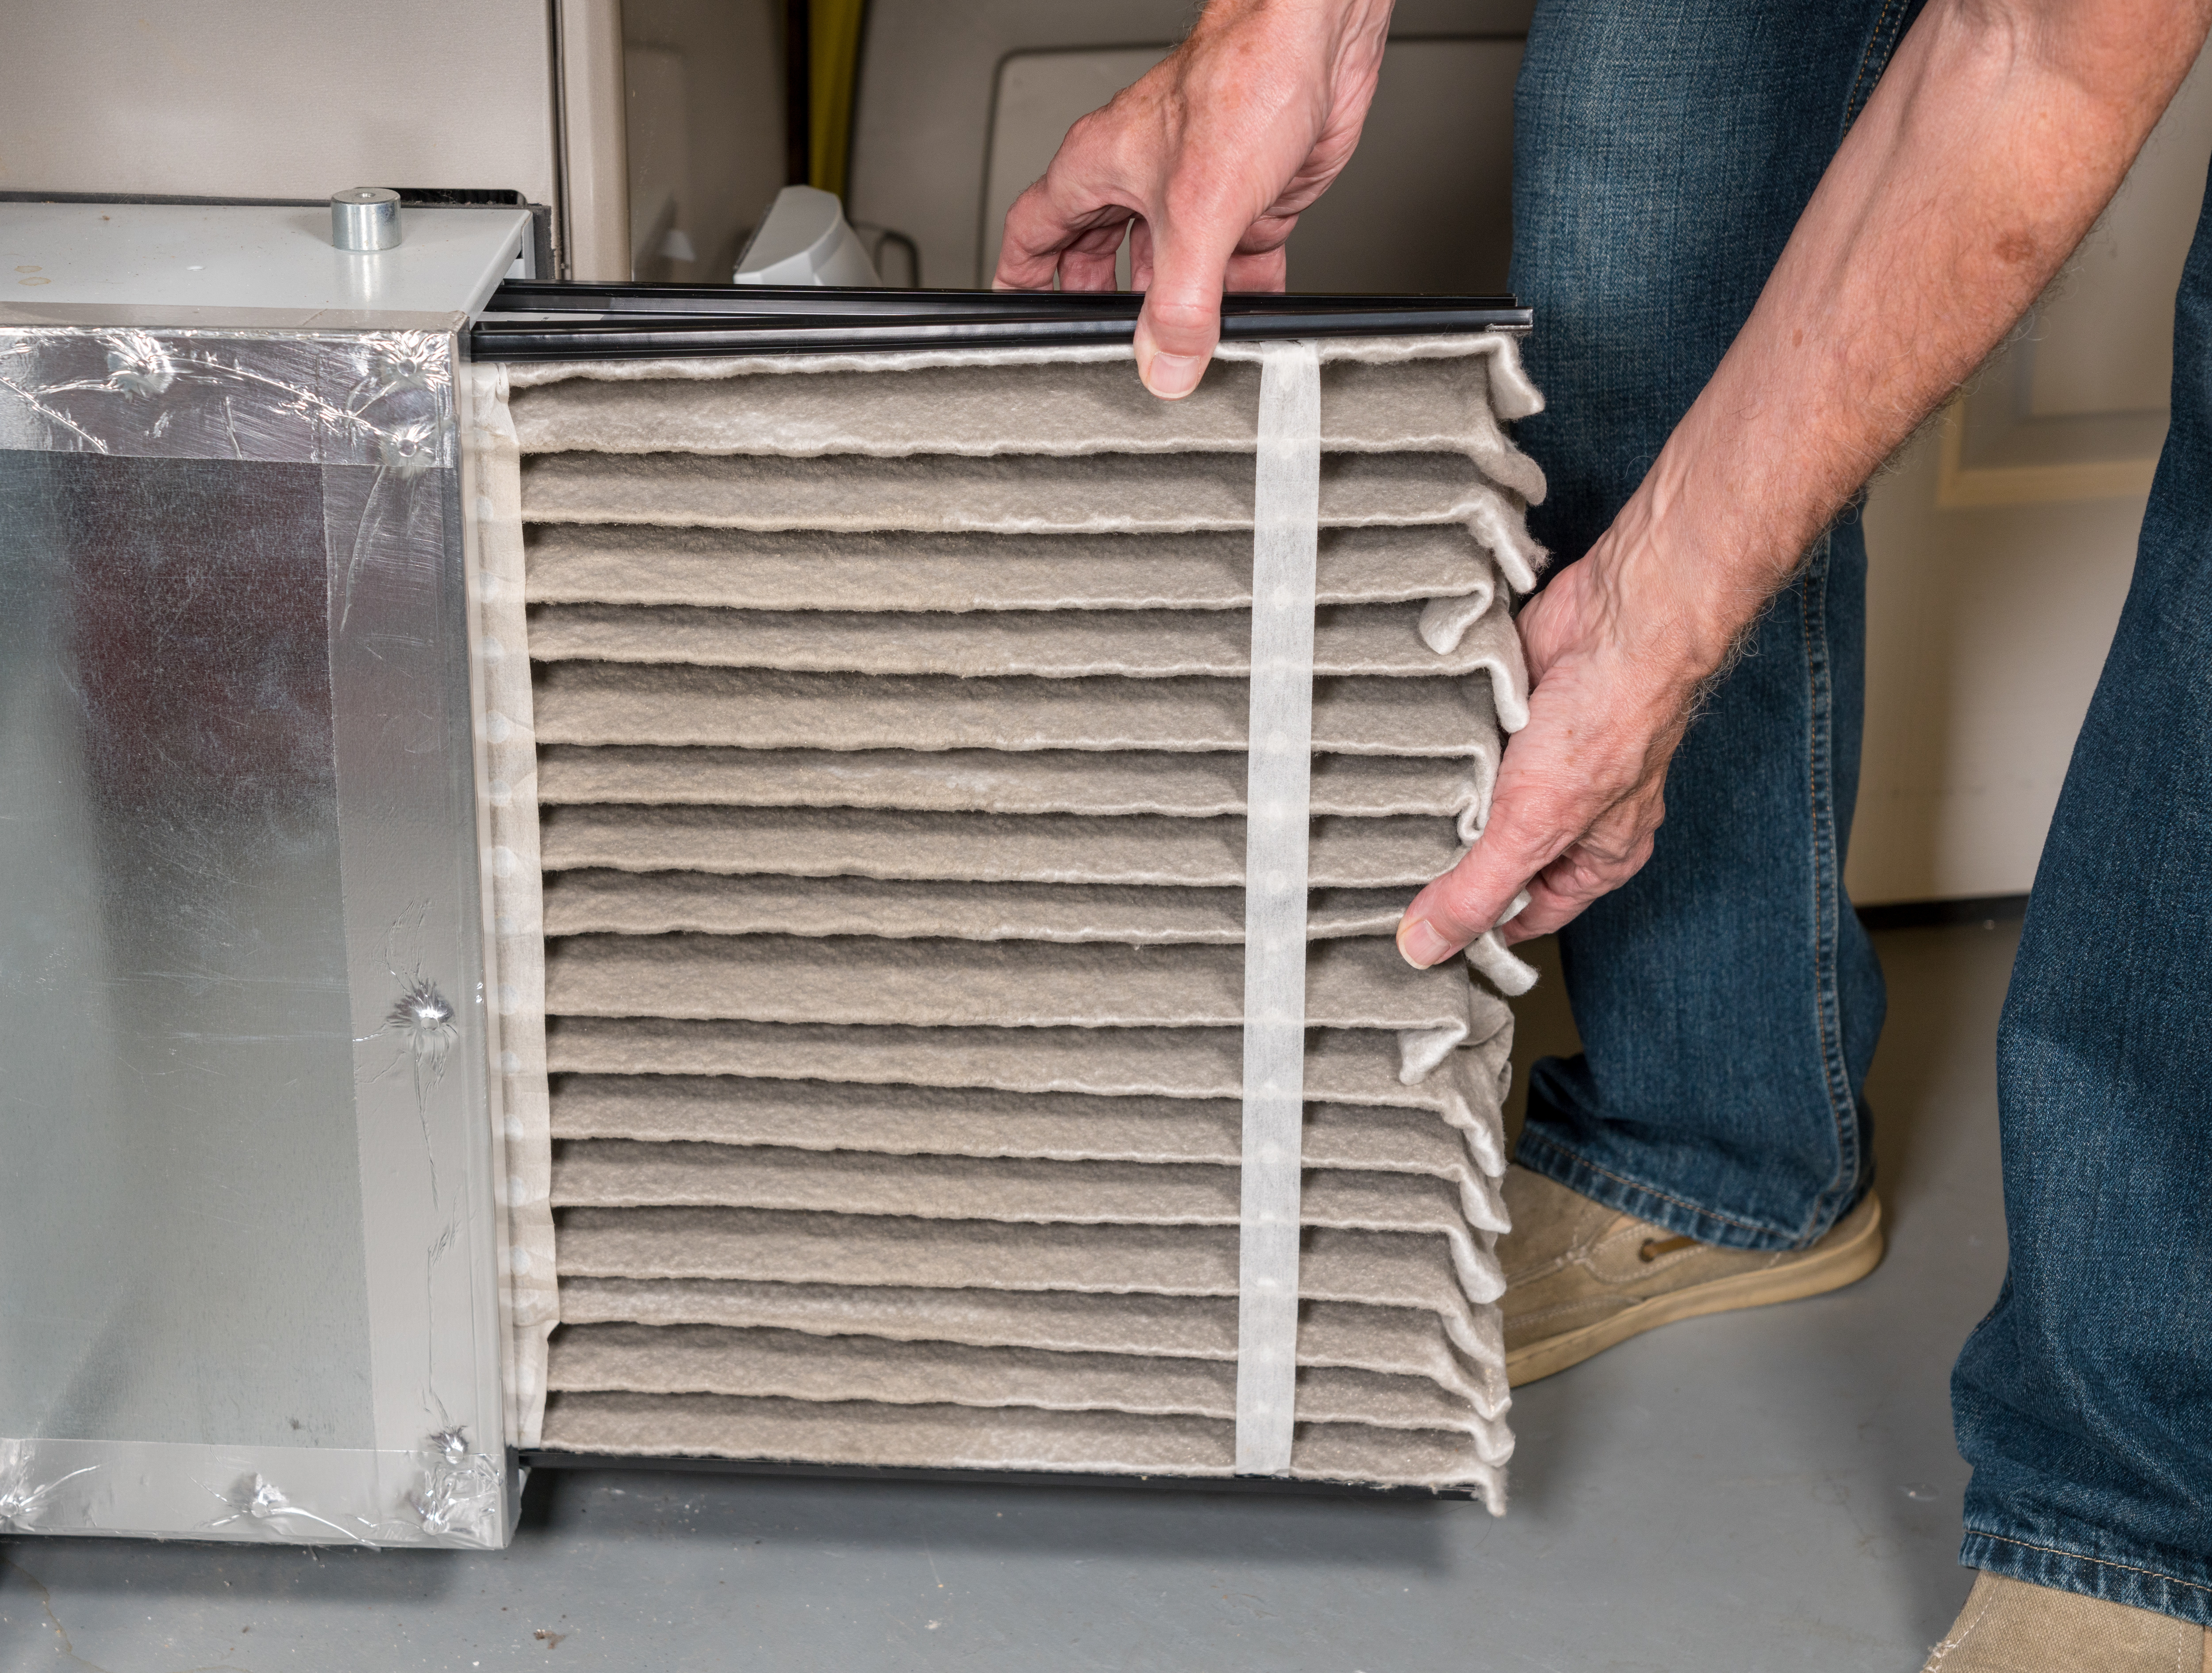 Why You Should Regularly Change Your Furnace Filter